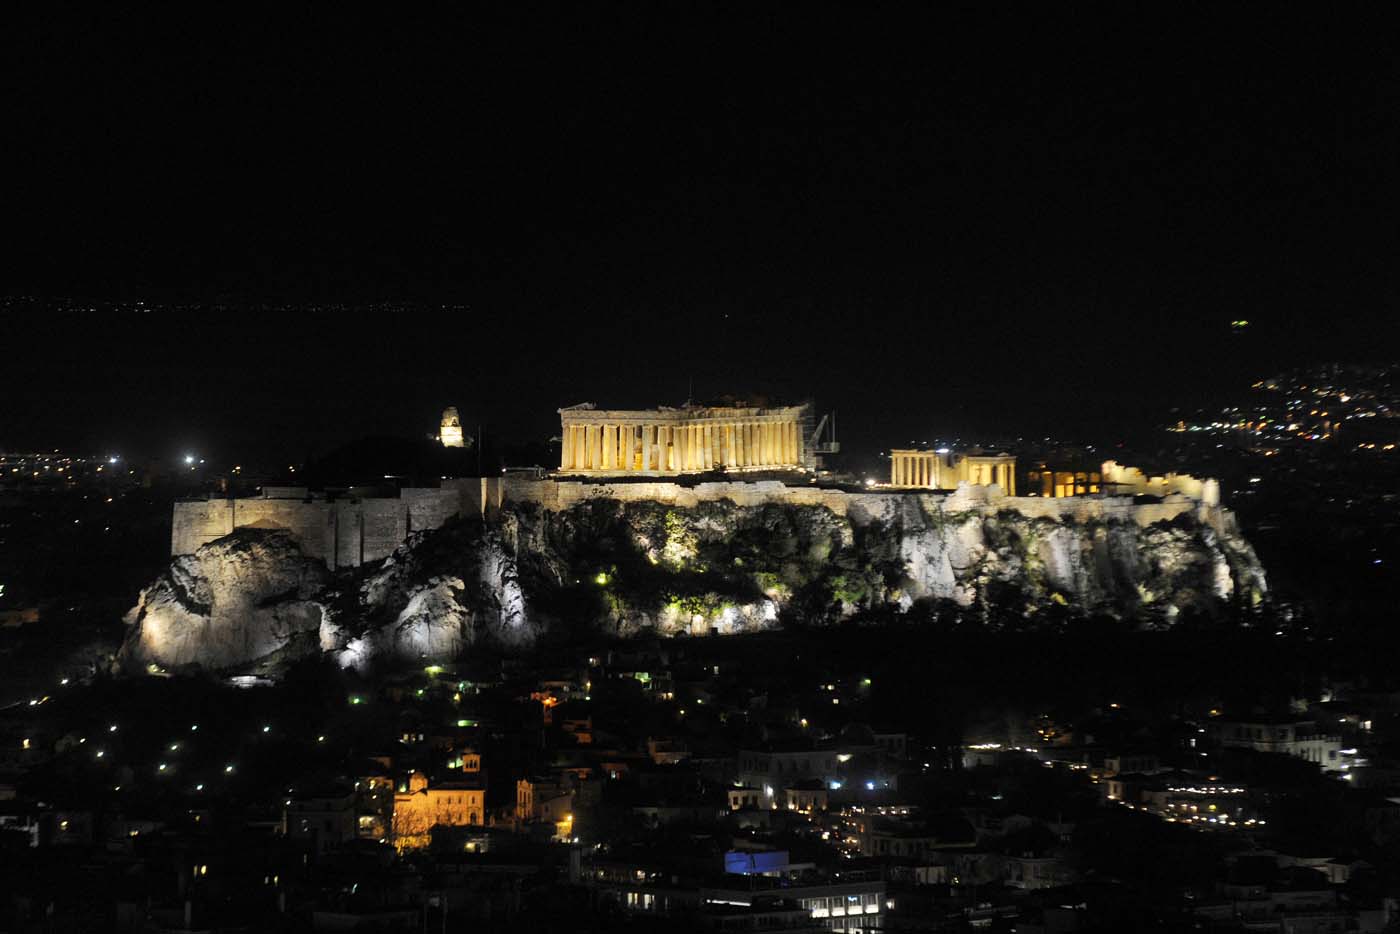 The hill of the Acropolis is pictured before Earth Hour in Athens, Greece, March 25, 2017. REUTERS/Michalis Karagiannis